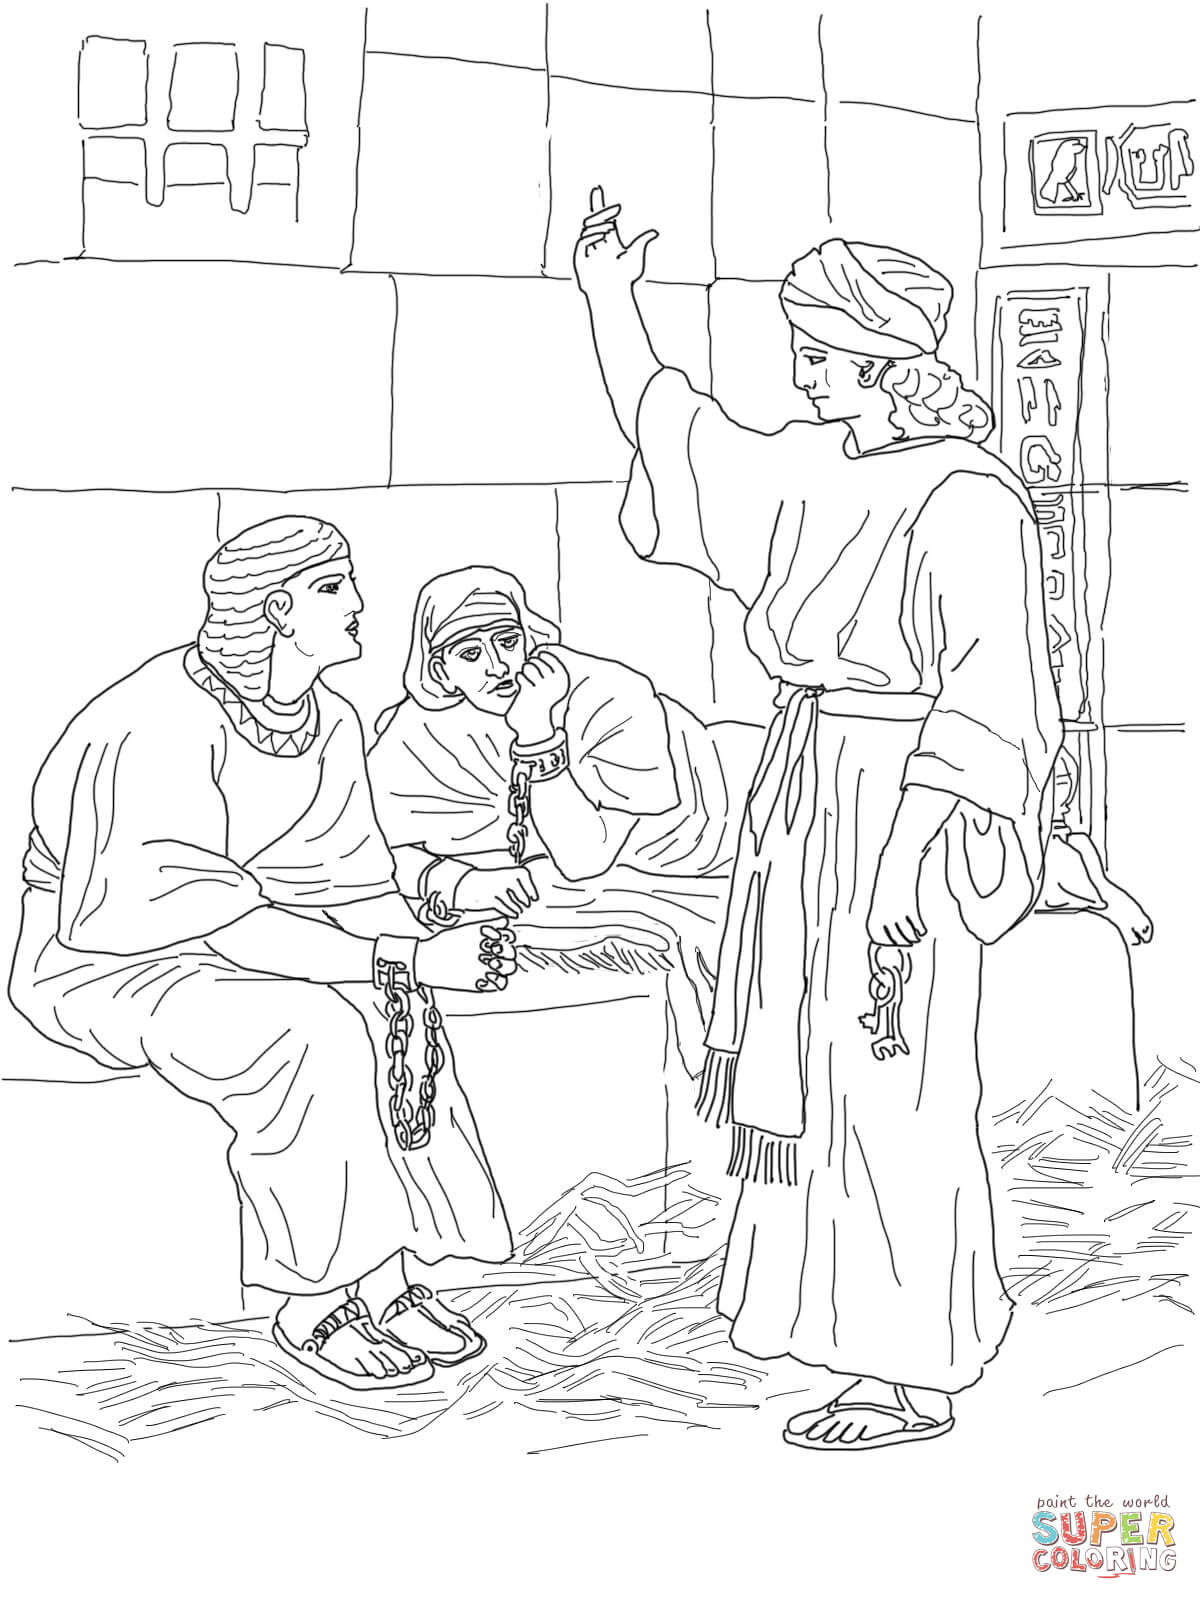 Joseph in Prison coloring page | Free Printable Coloring Pages